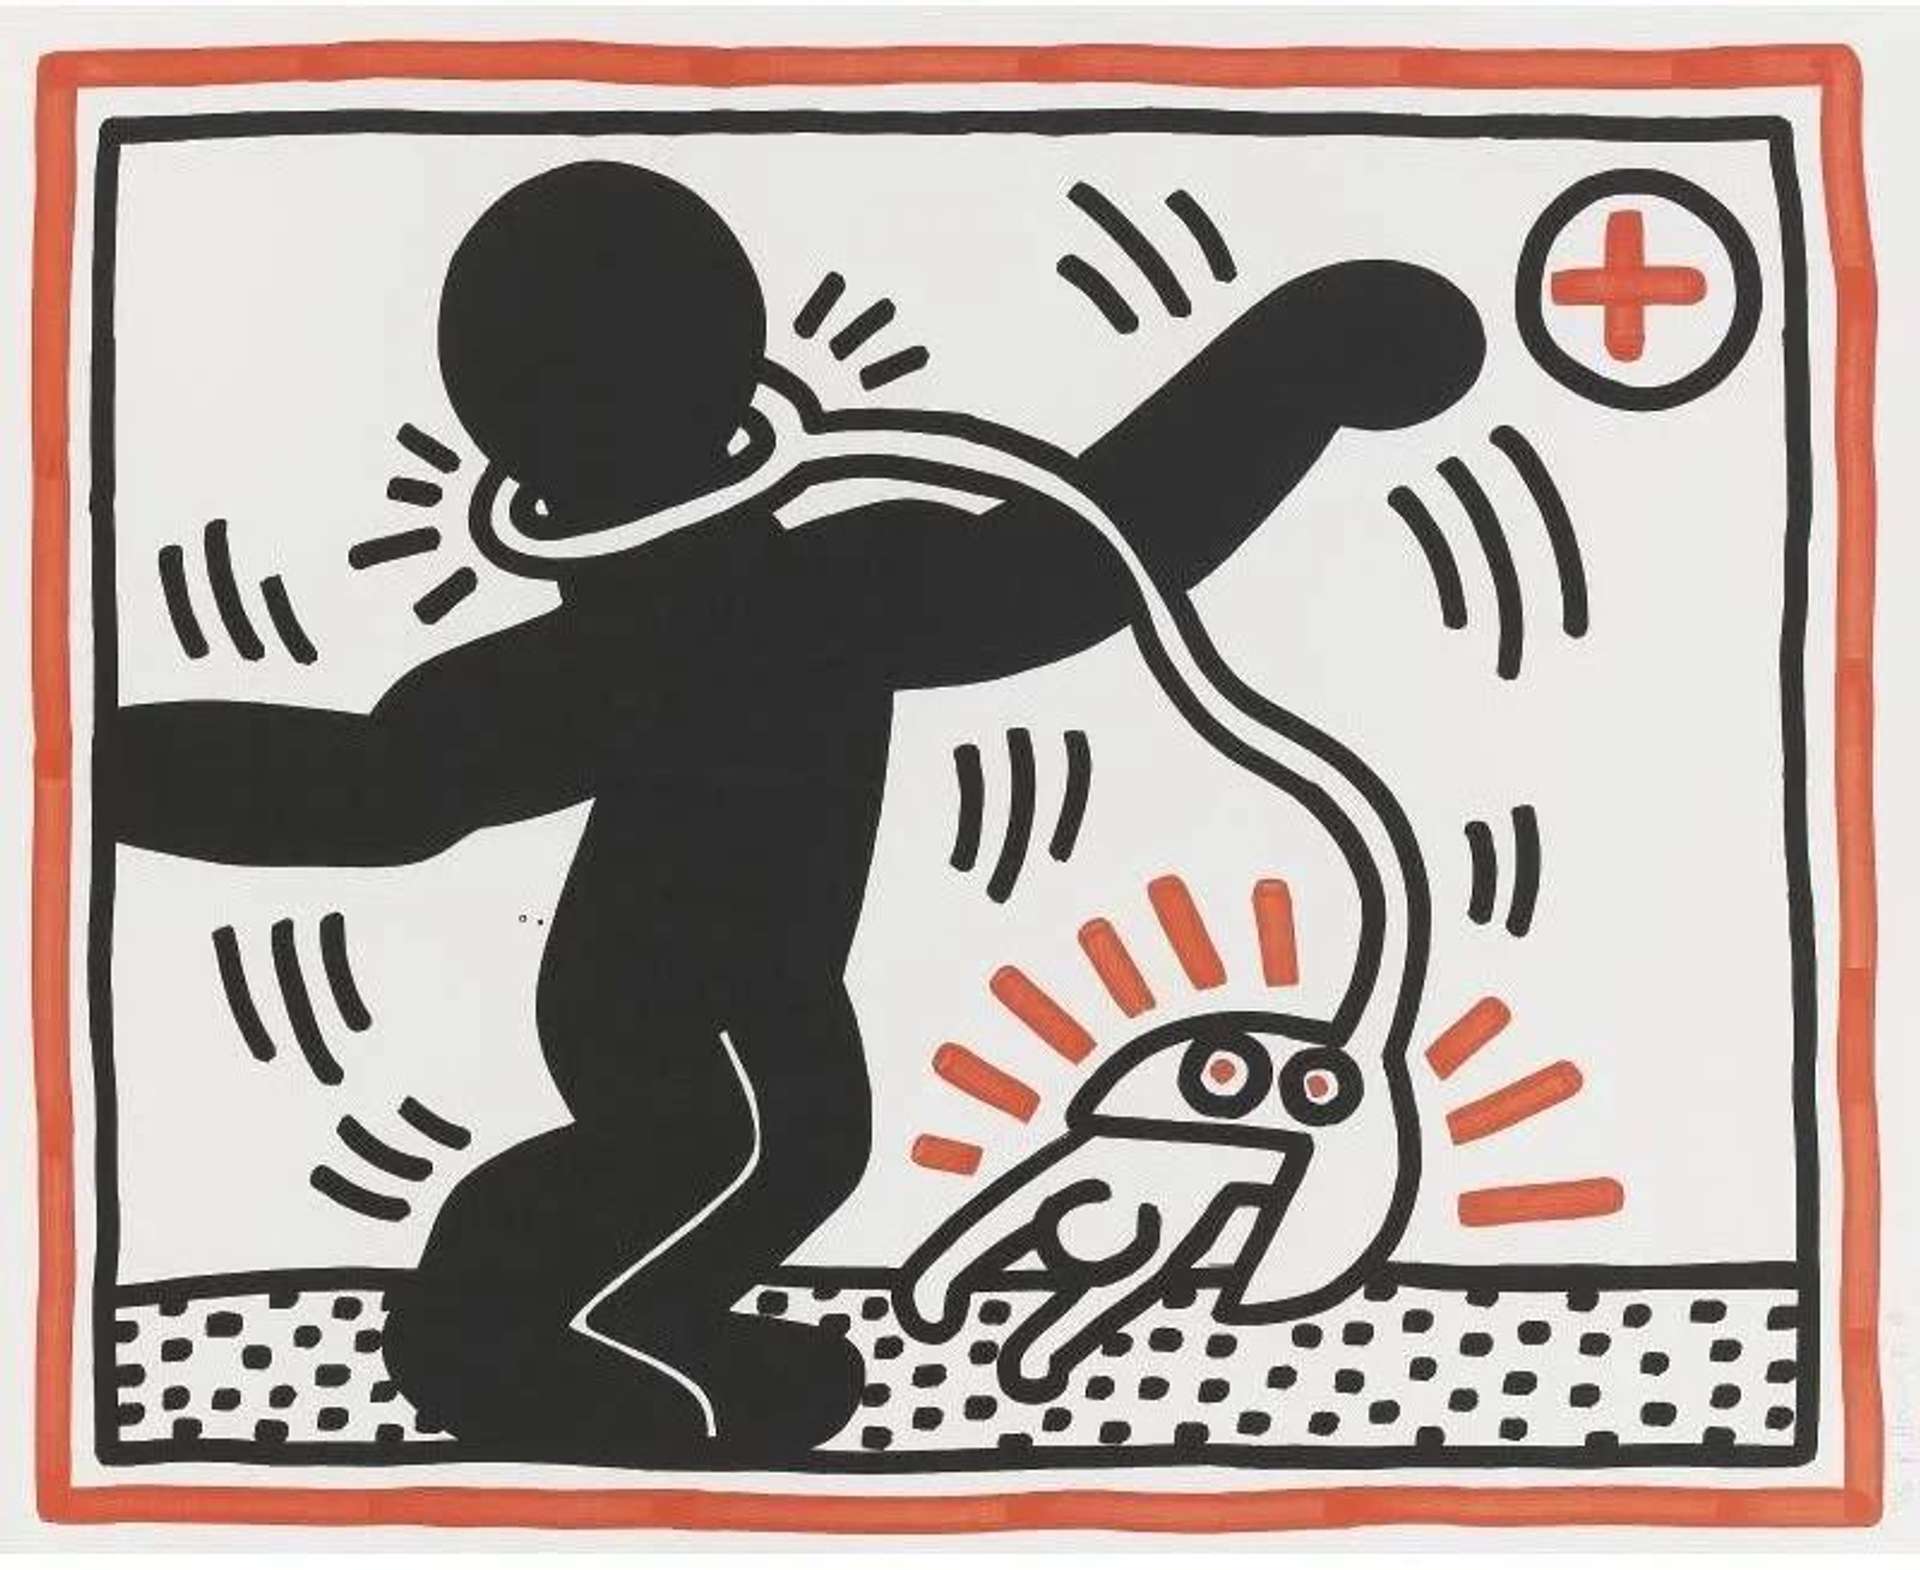 Free South Africa 1 - Signed Print by Keith Haring 1985 - MyArtBroker